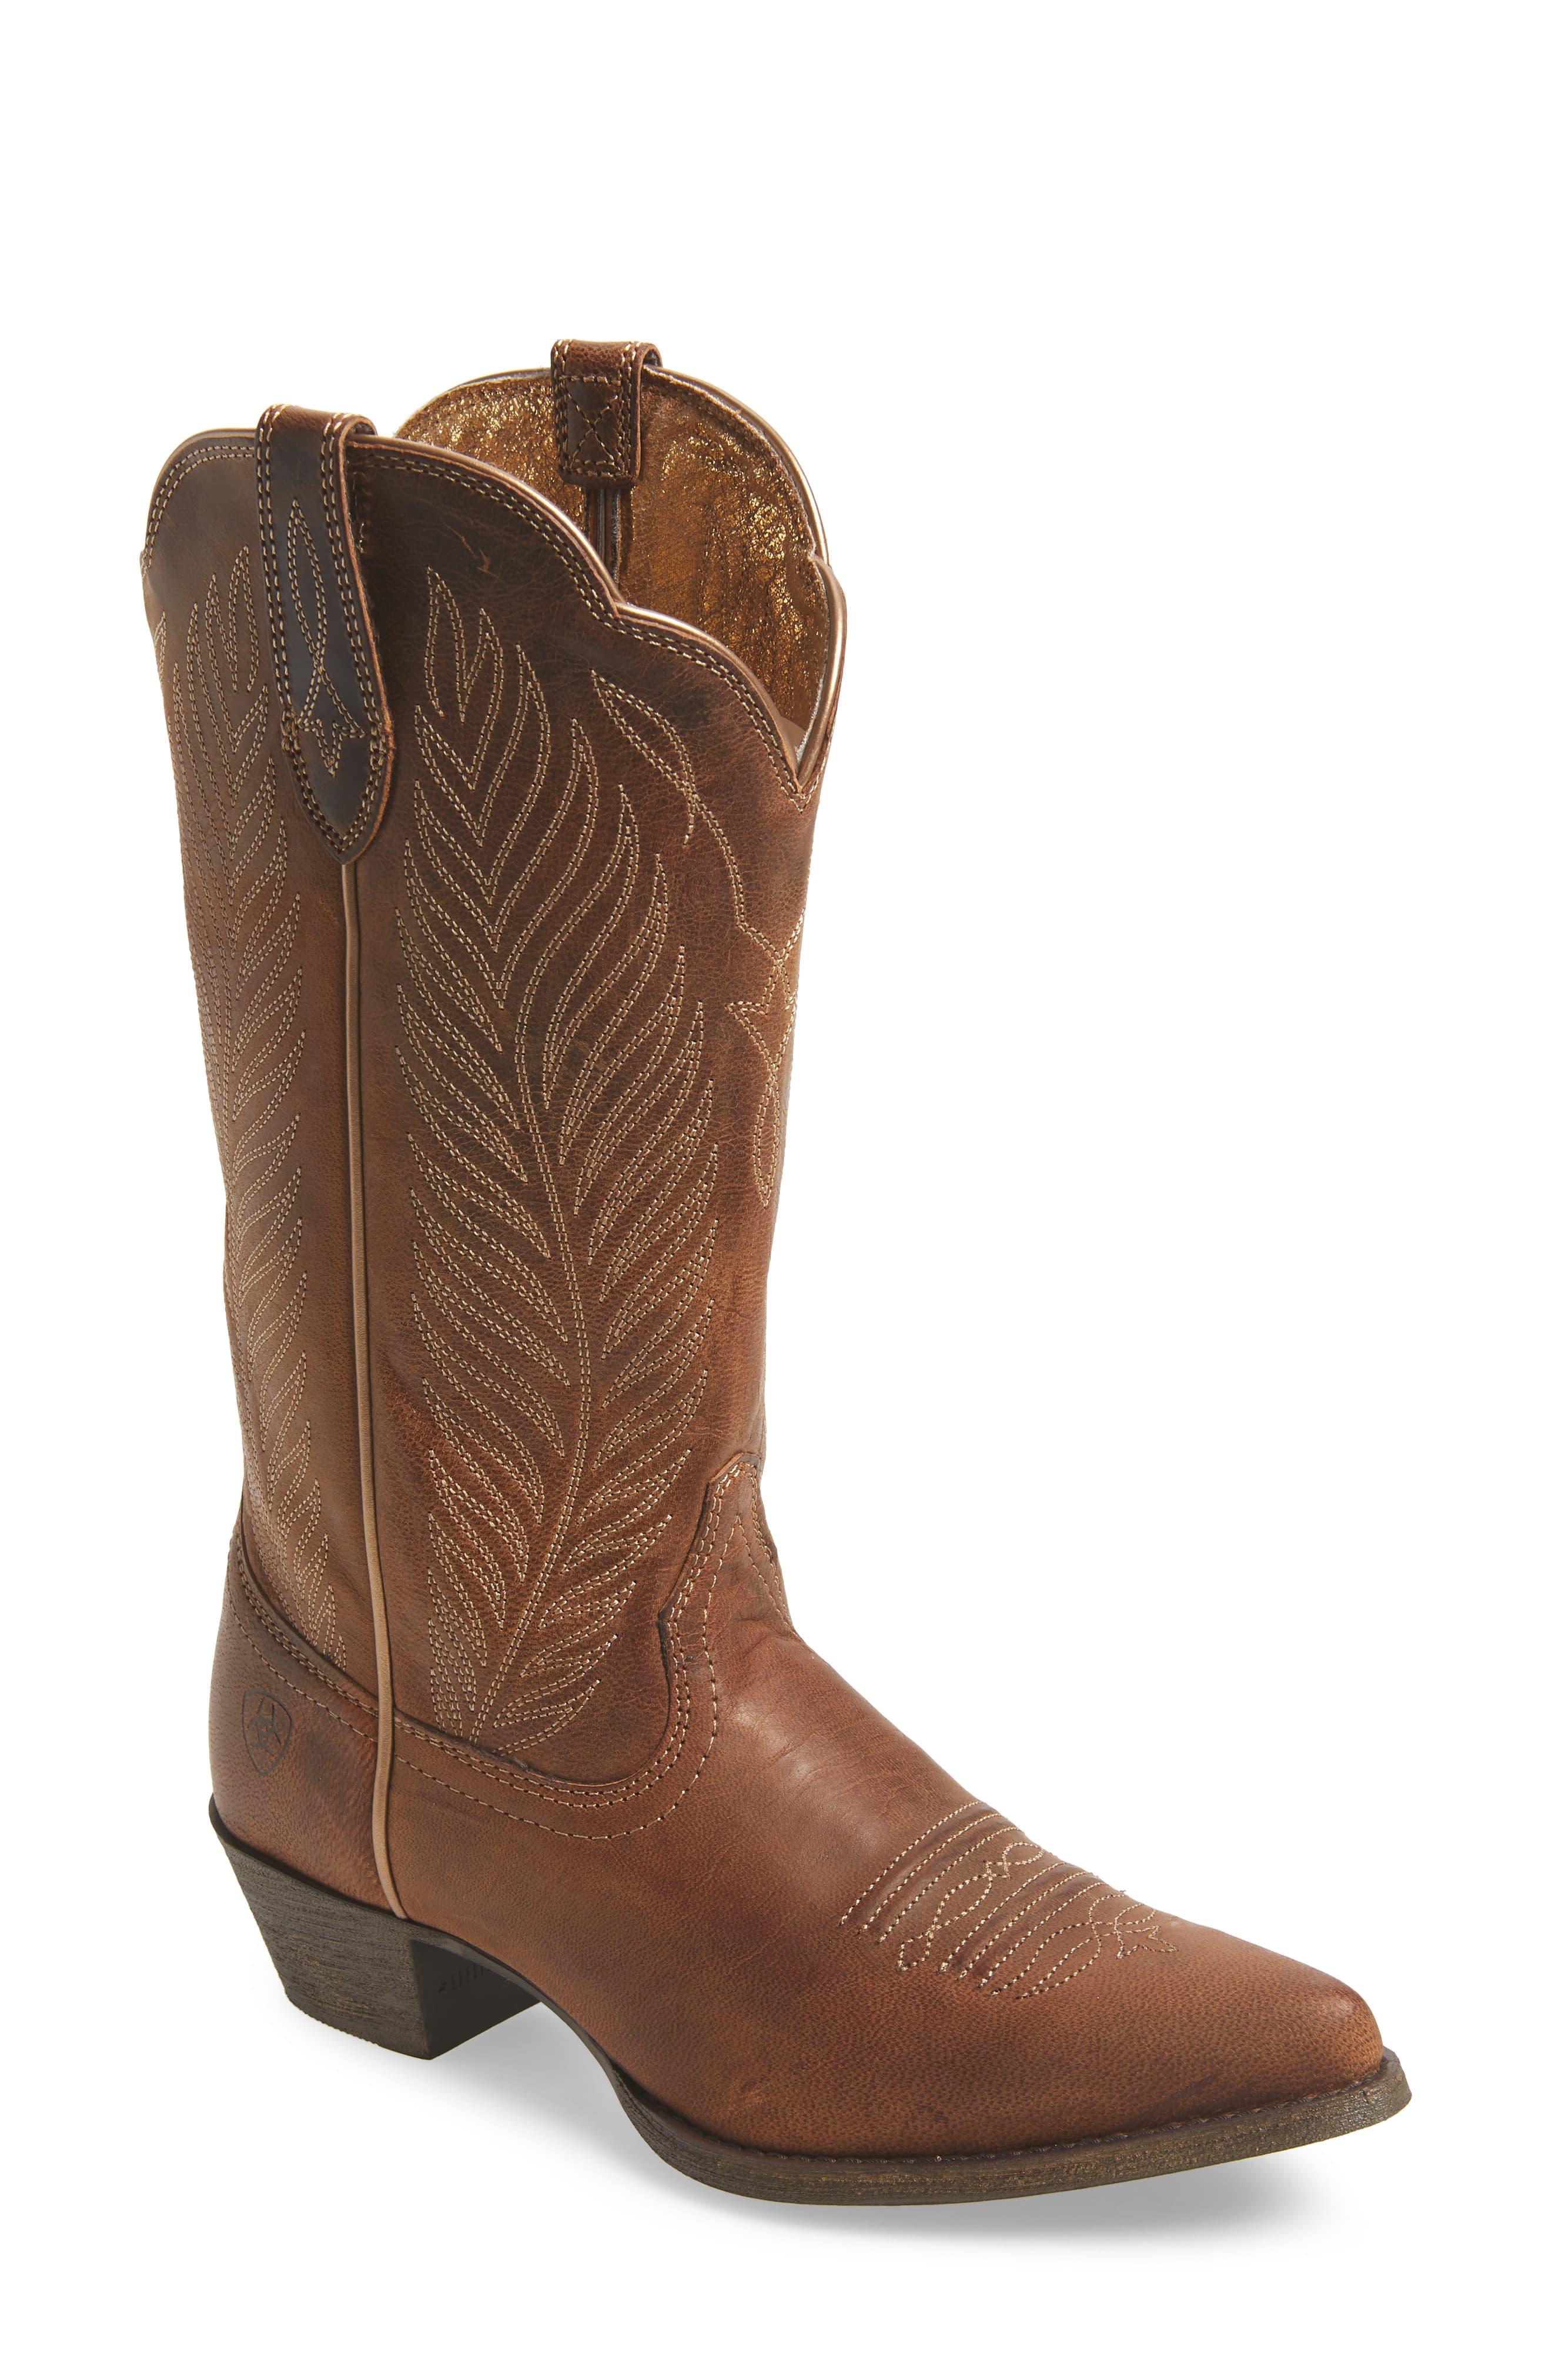 Pearl Details about   ARIAT Women's Round Up Johanna Western Boot  11